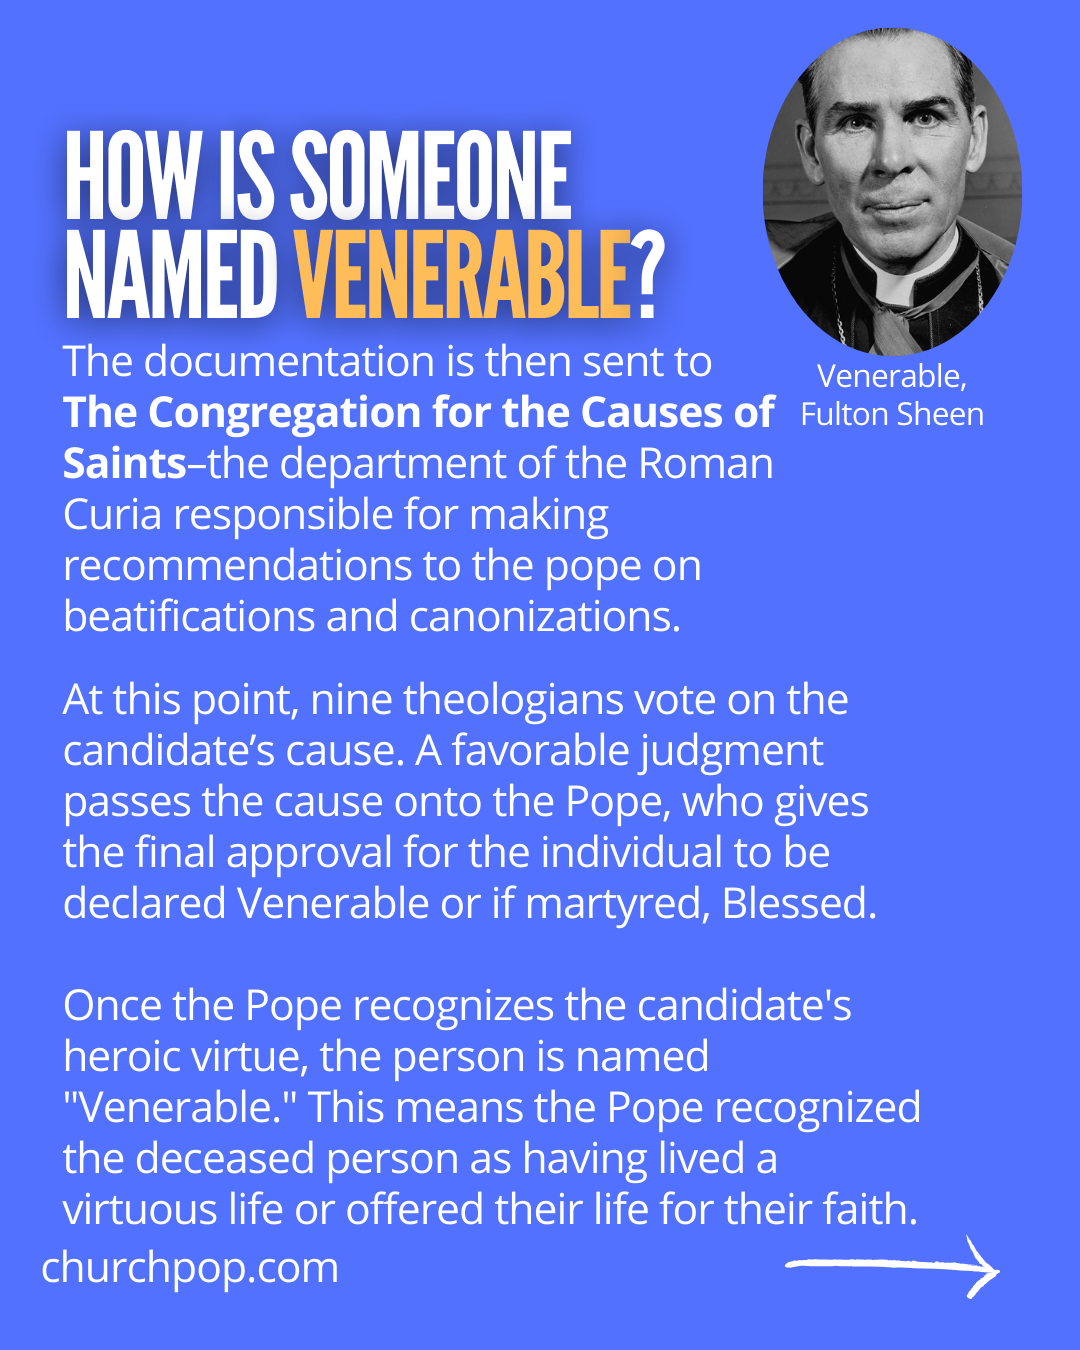 How is someone named Venerable?